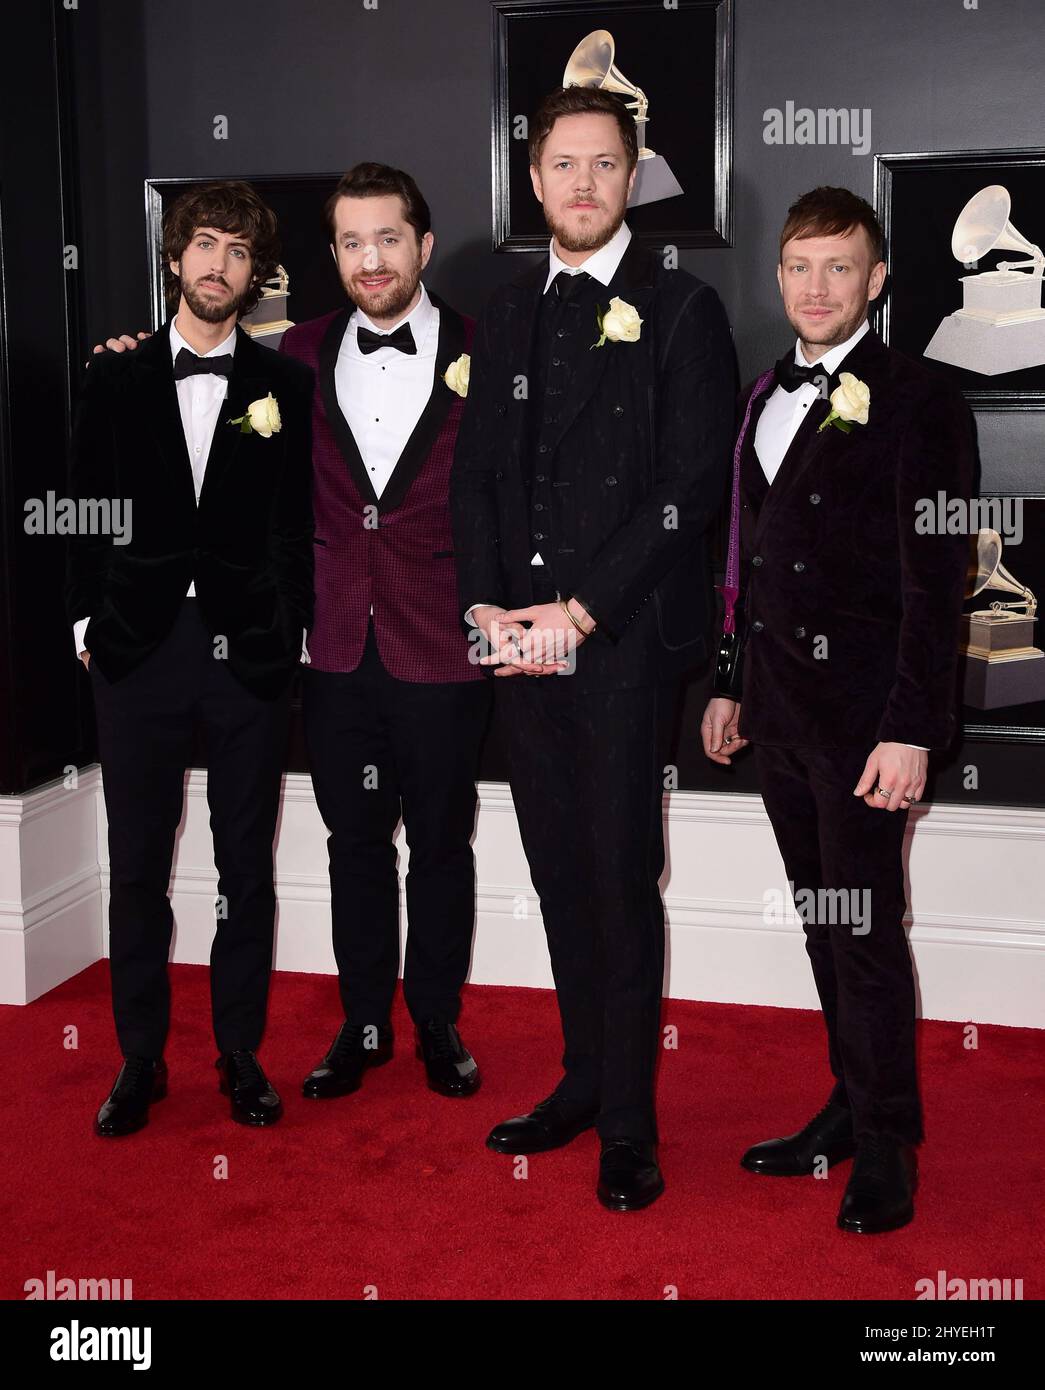 Imagine Dragons at the 60th Annual GRAMMY Awards held at Madison Square Garden on January 28, 2018 in New York, NY Stock Photo